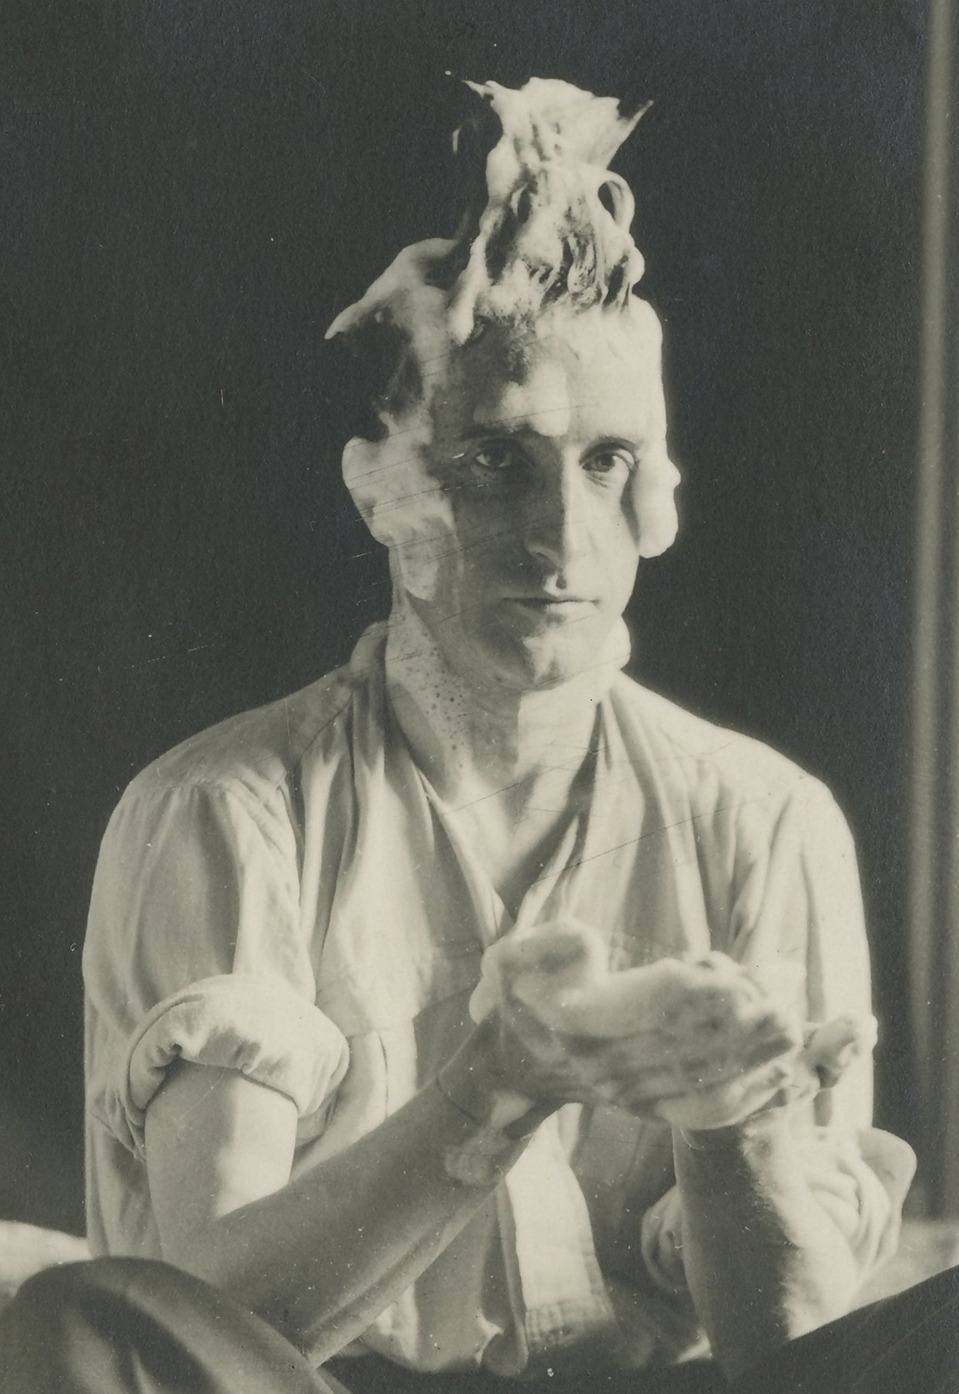 Marcel Duchamp photographed by Man Ray, 1924.